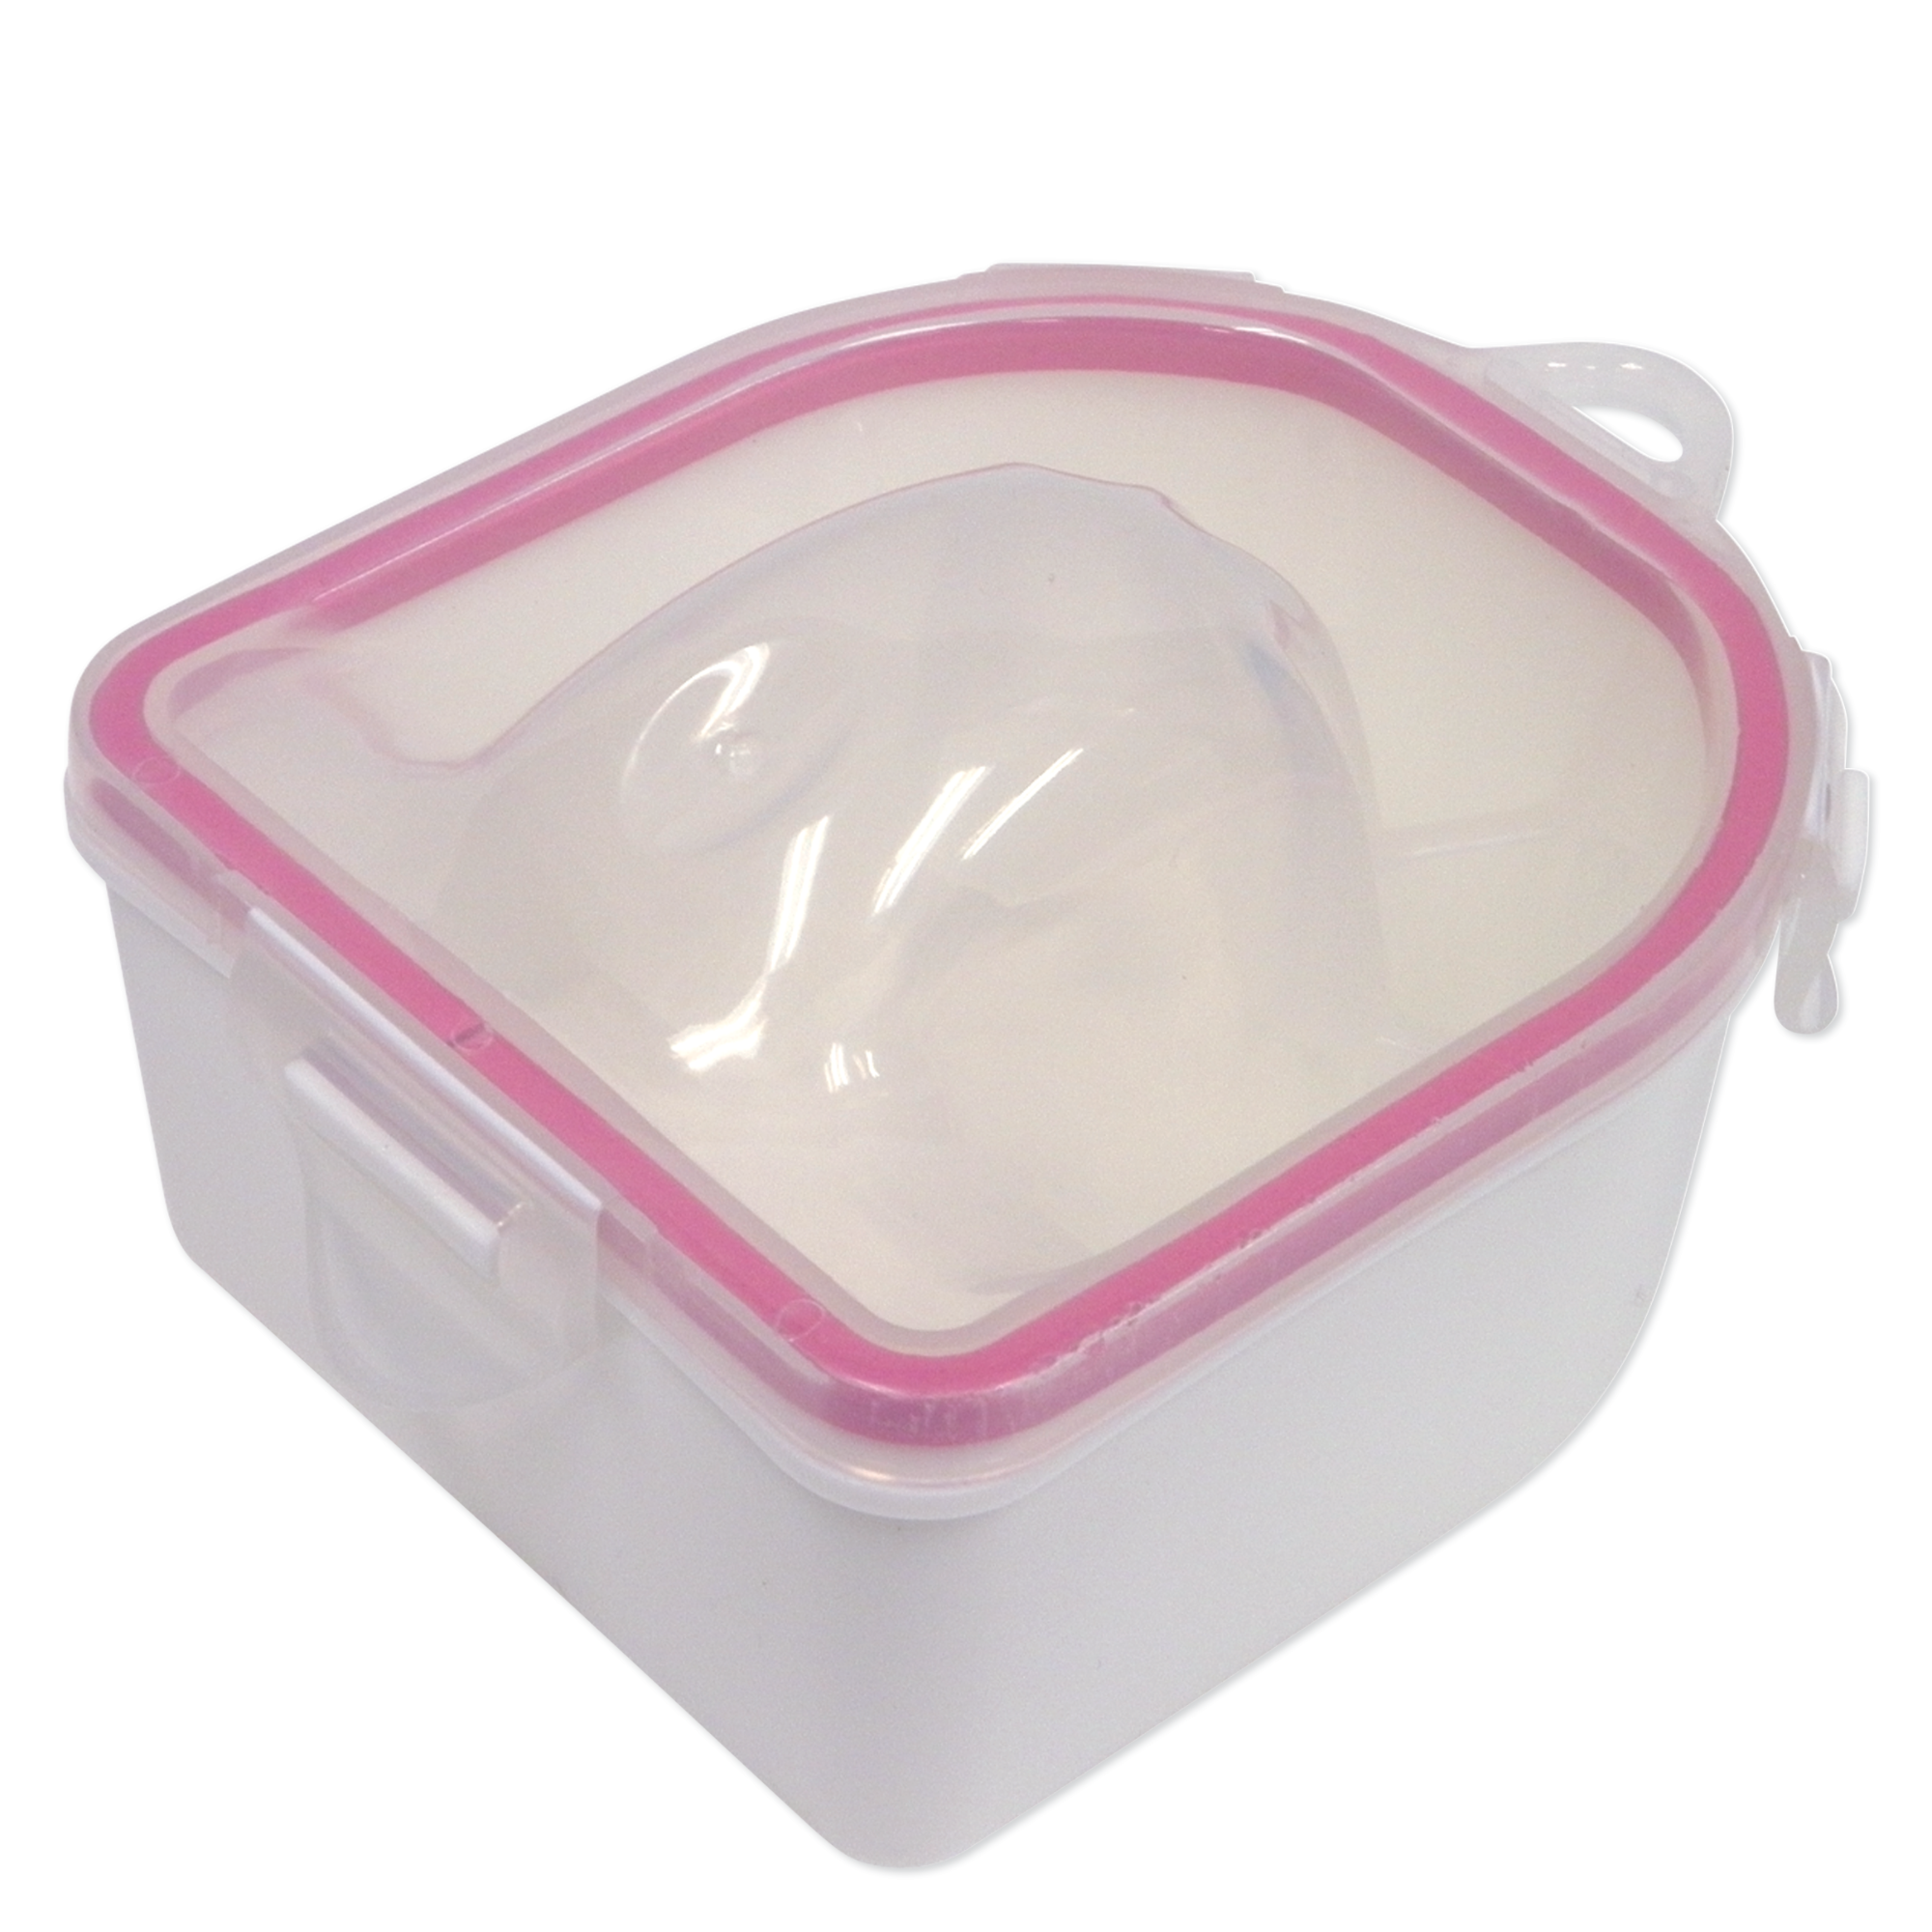 Deluxe Warming Manicure Bowl